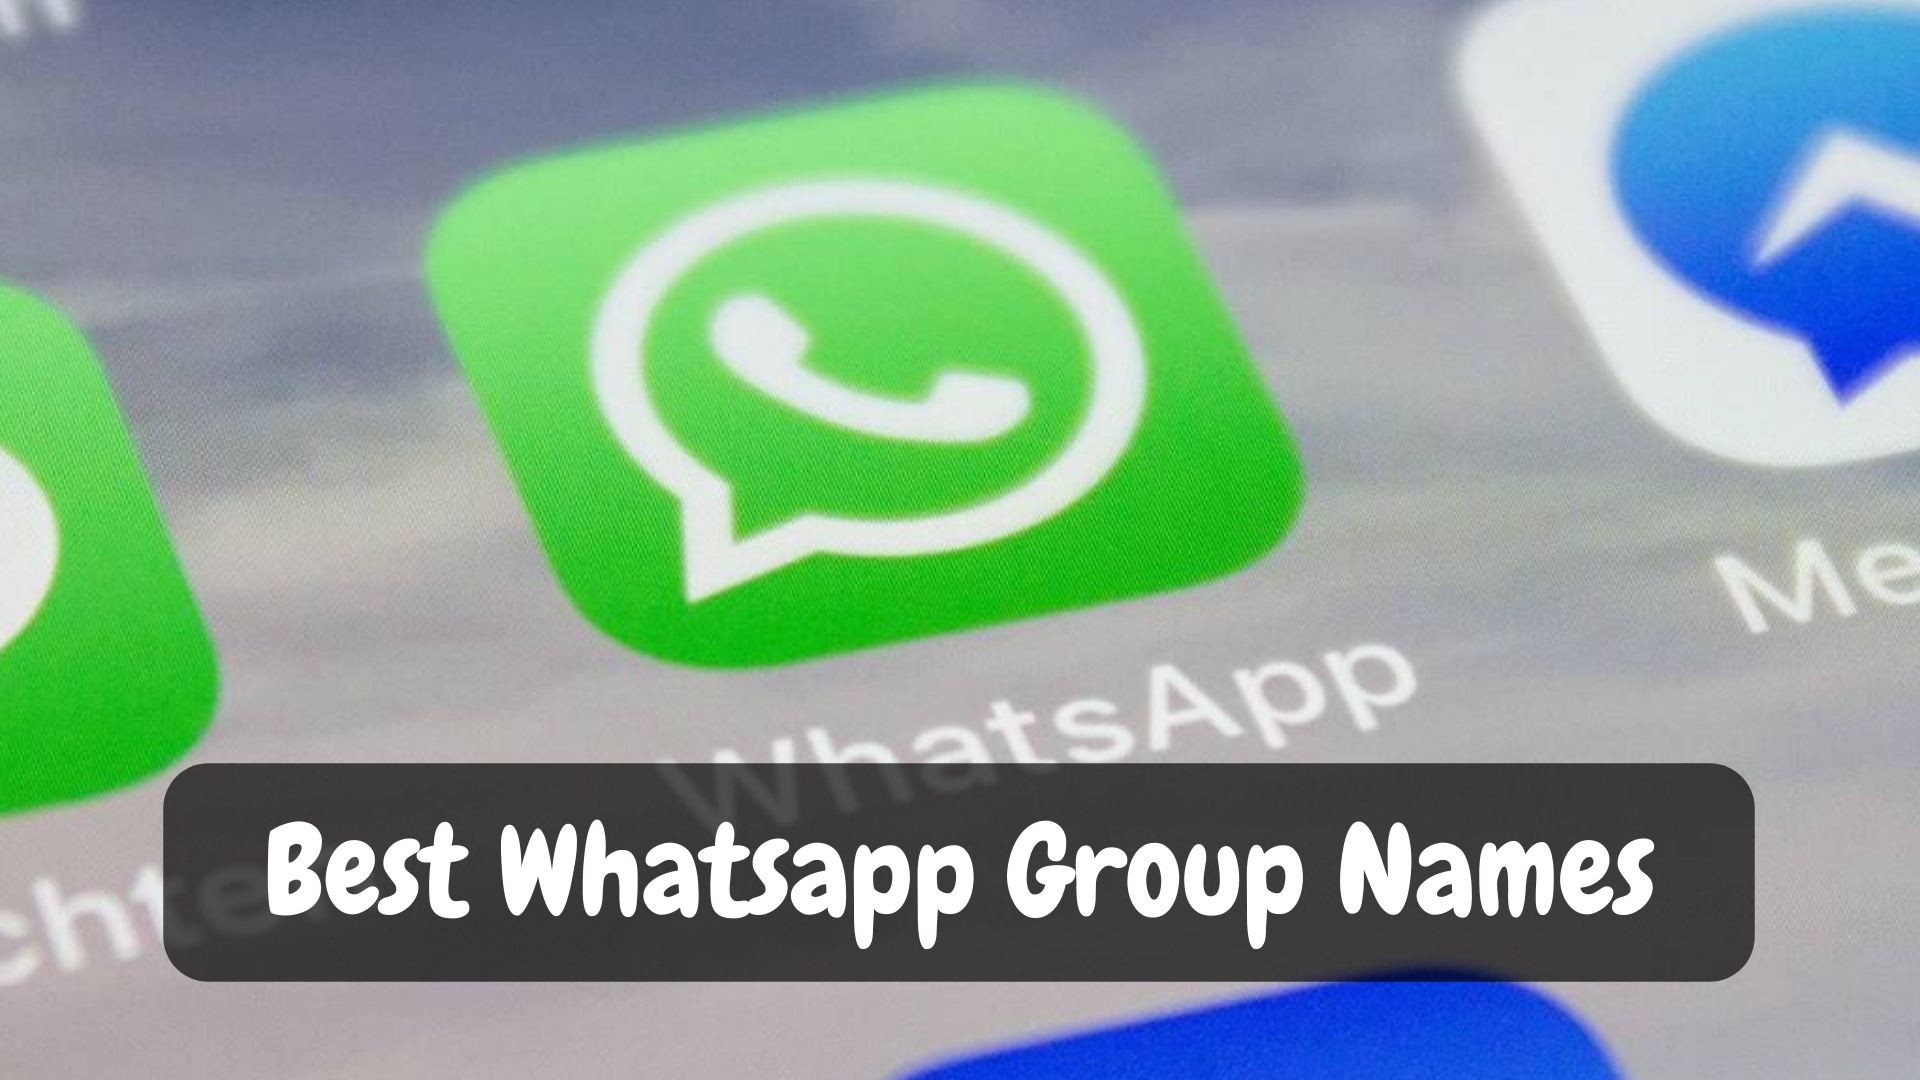 300 Best Whatsapp Group Names Friends Girls Boys Funny Family Unique Cool Geekyfy